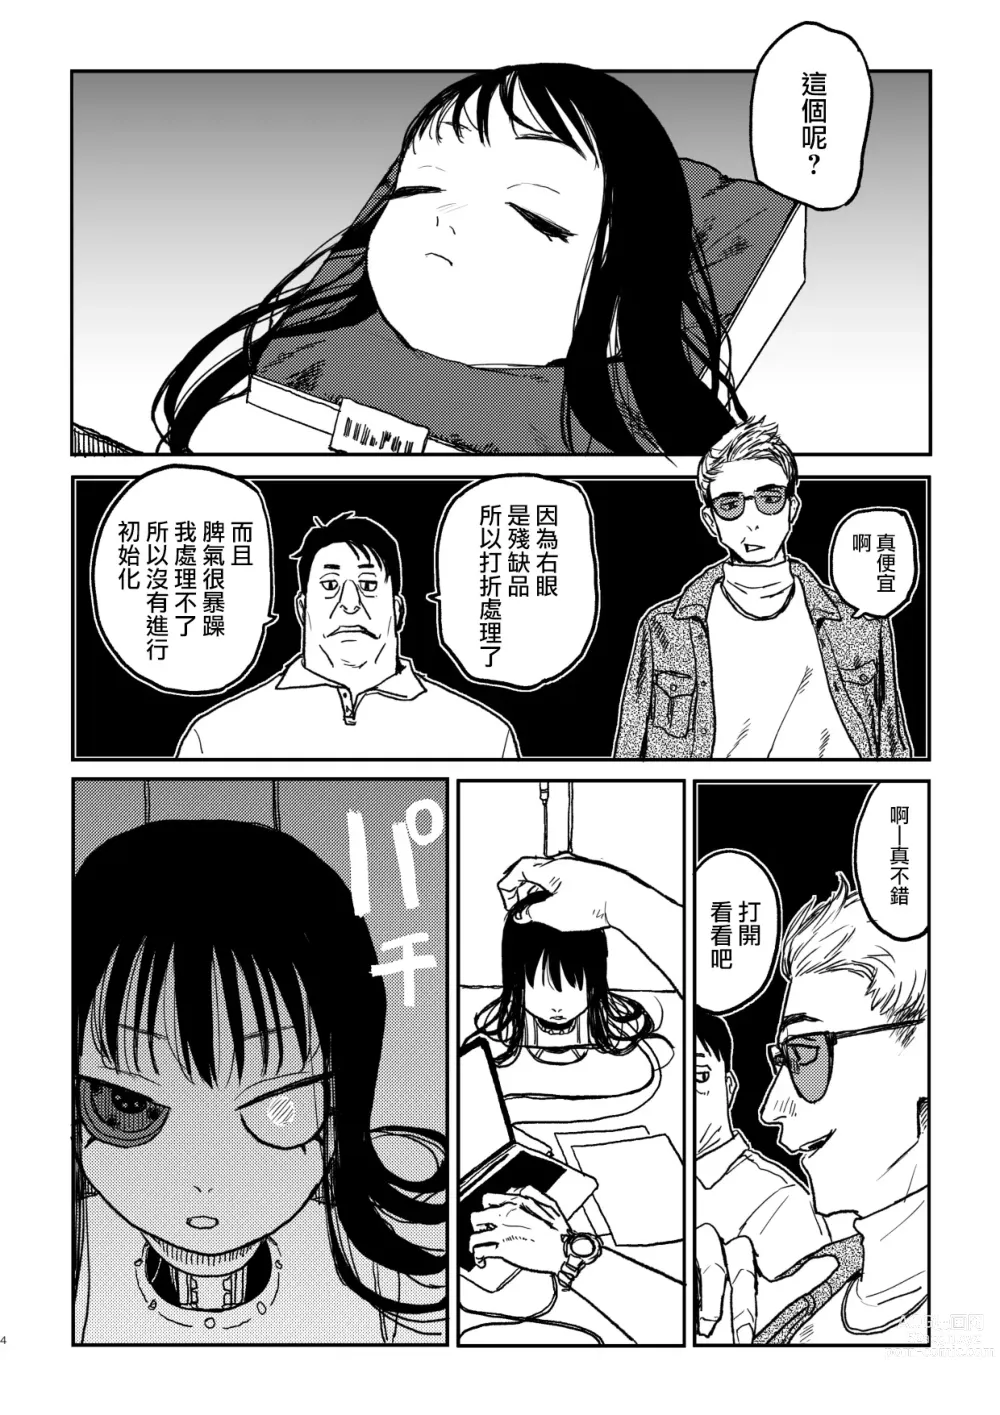 Page 3 of doujinshi better than SEX:A